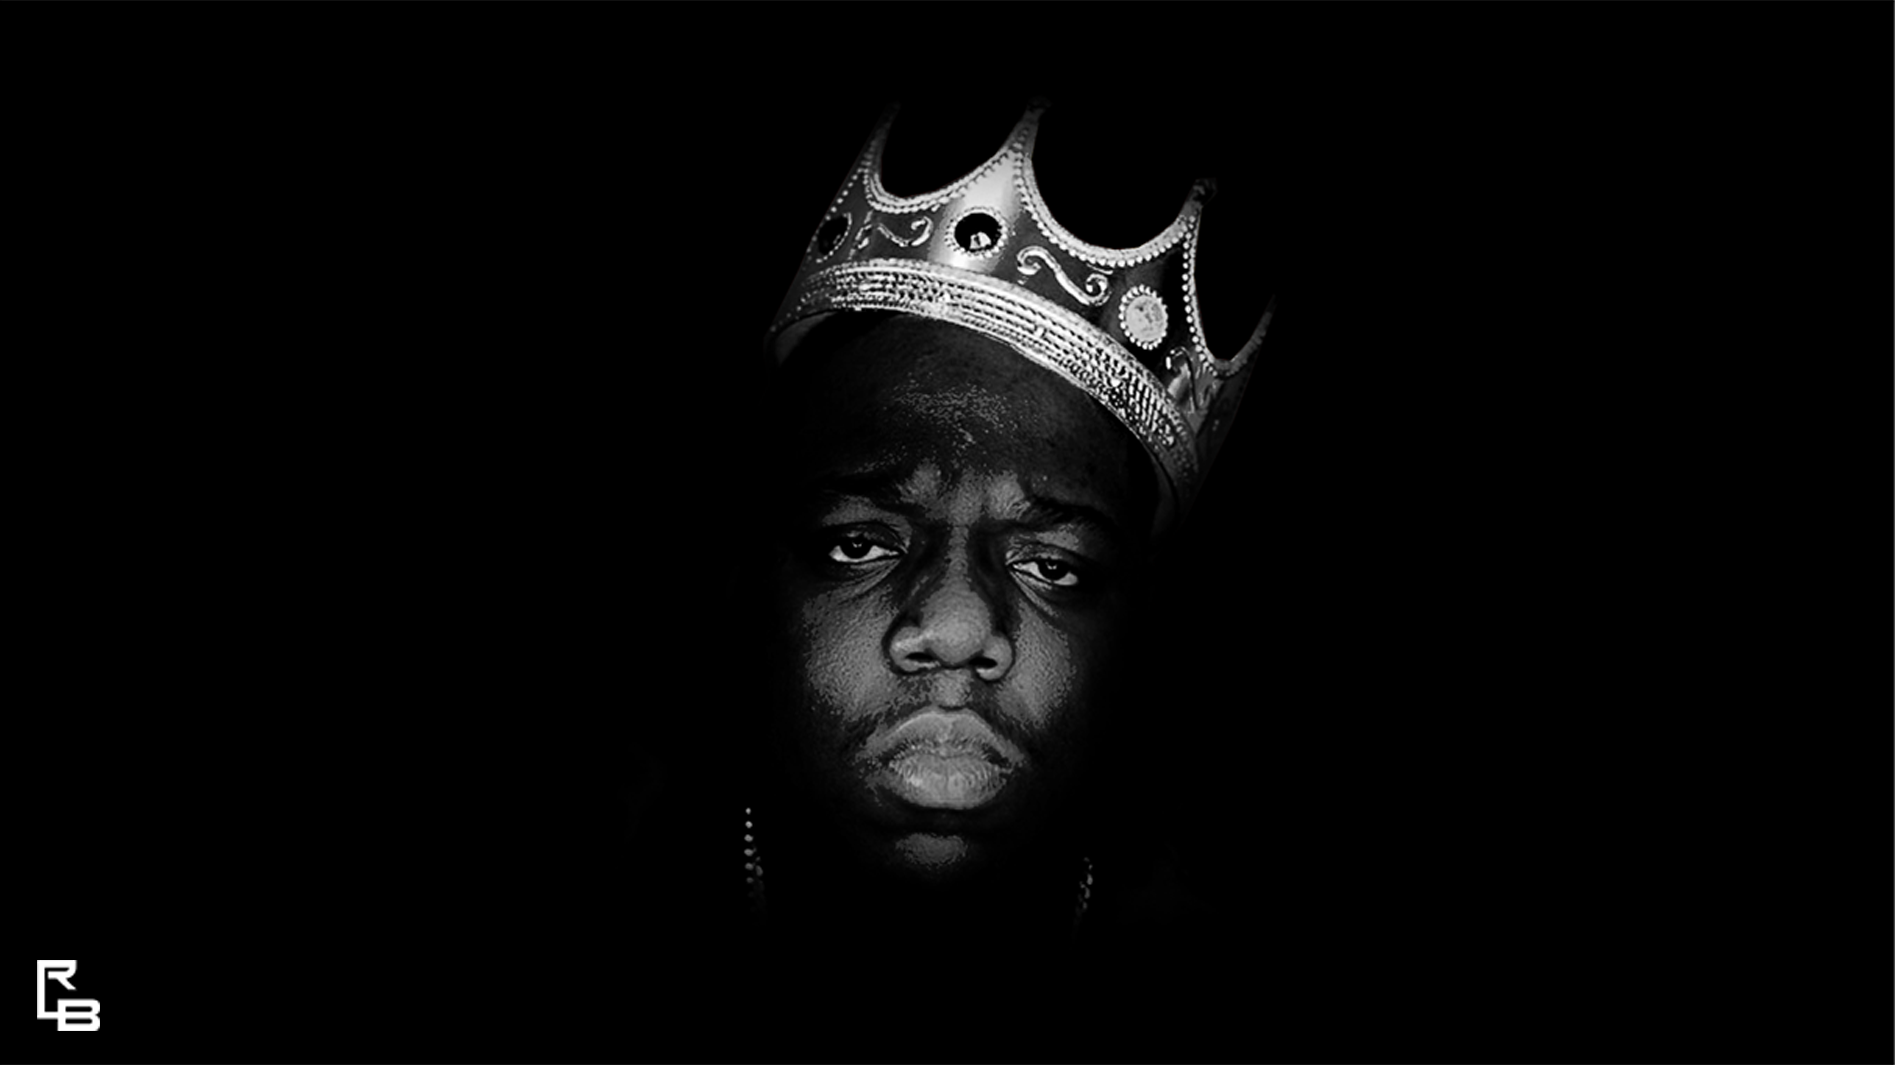 Hd Notorious Big Wallpaper Images amp Pictures   Becuo 1895x1065